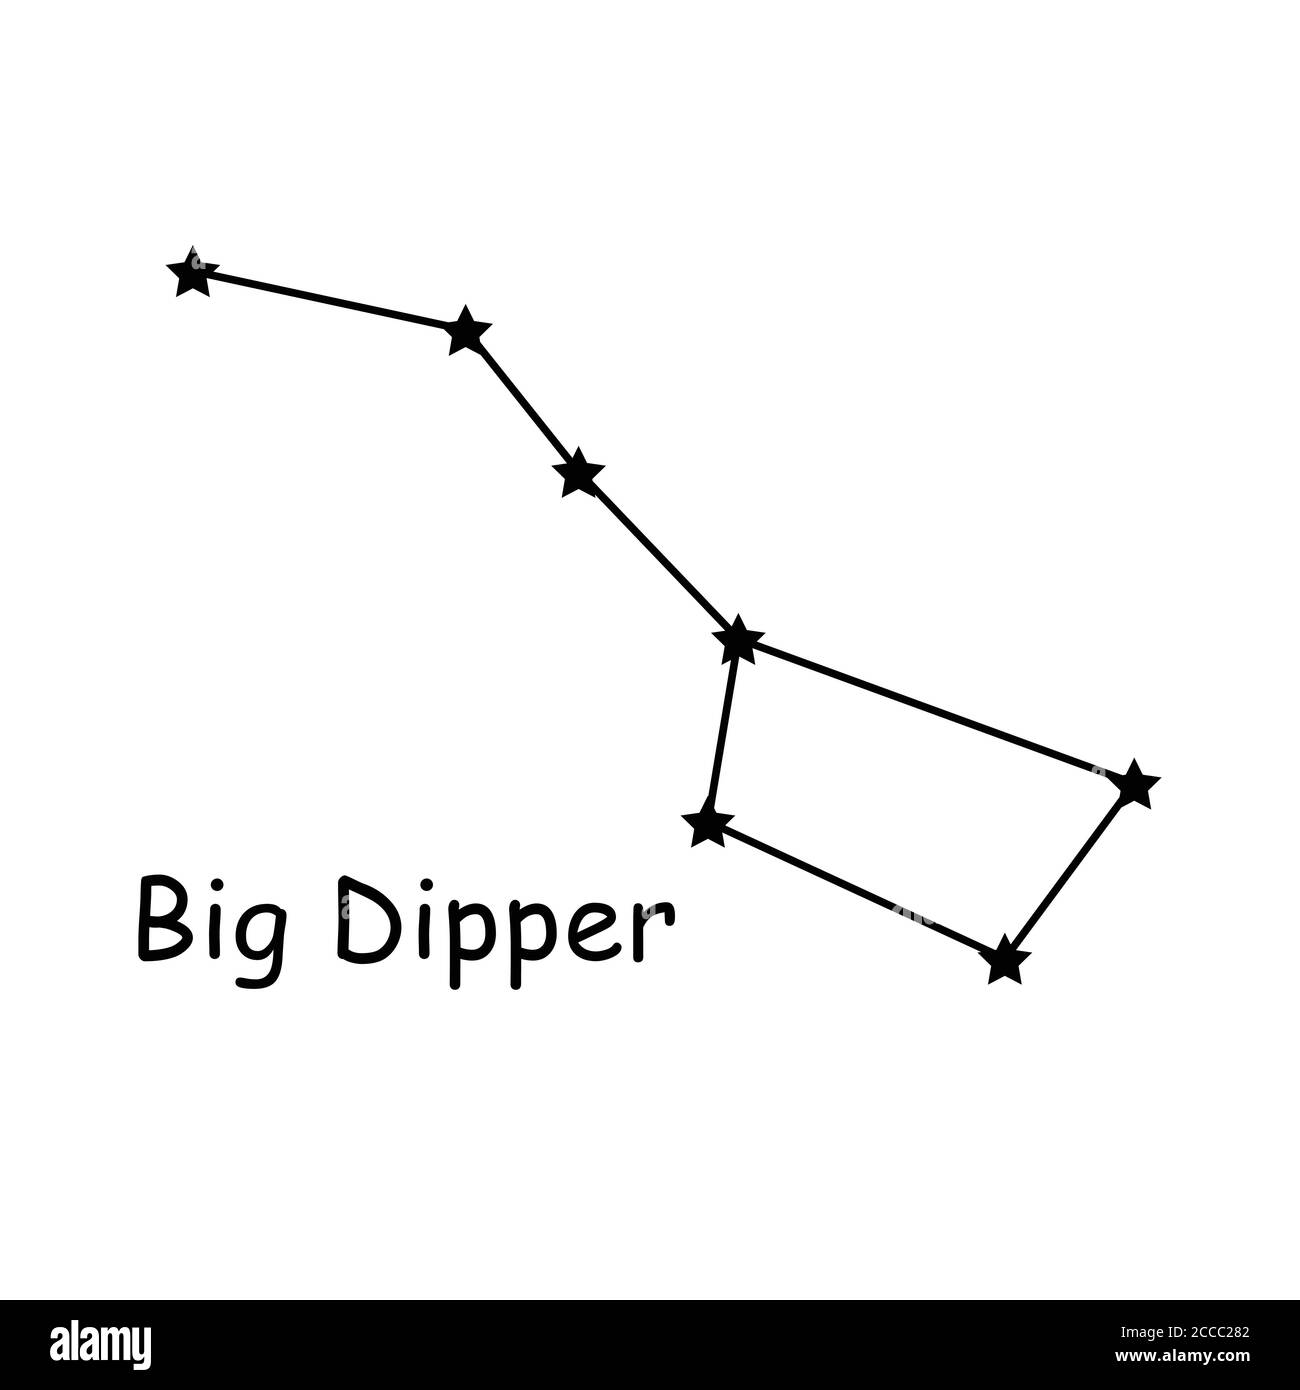 Big Dipper Constellation Stars Vector Icon Pictogram with Description Text. Artwork Depicting the Plough of the Constellation Ursa Major in the Night Stock Vector